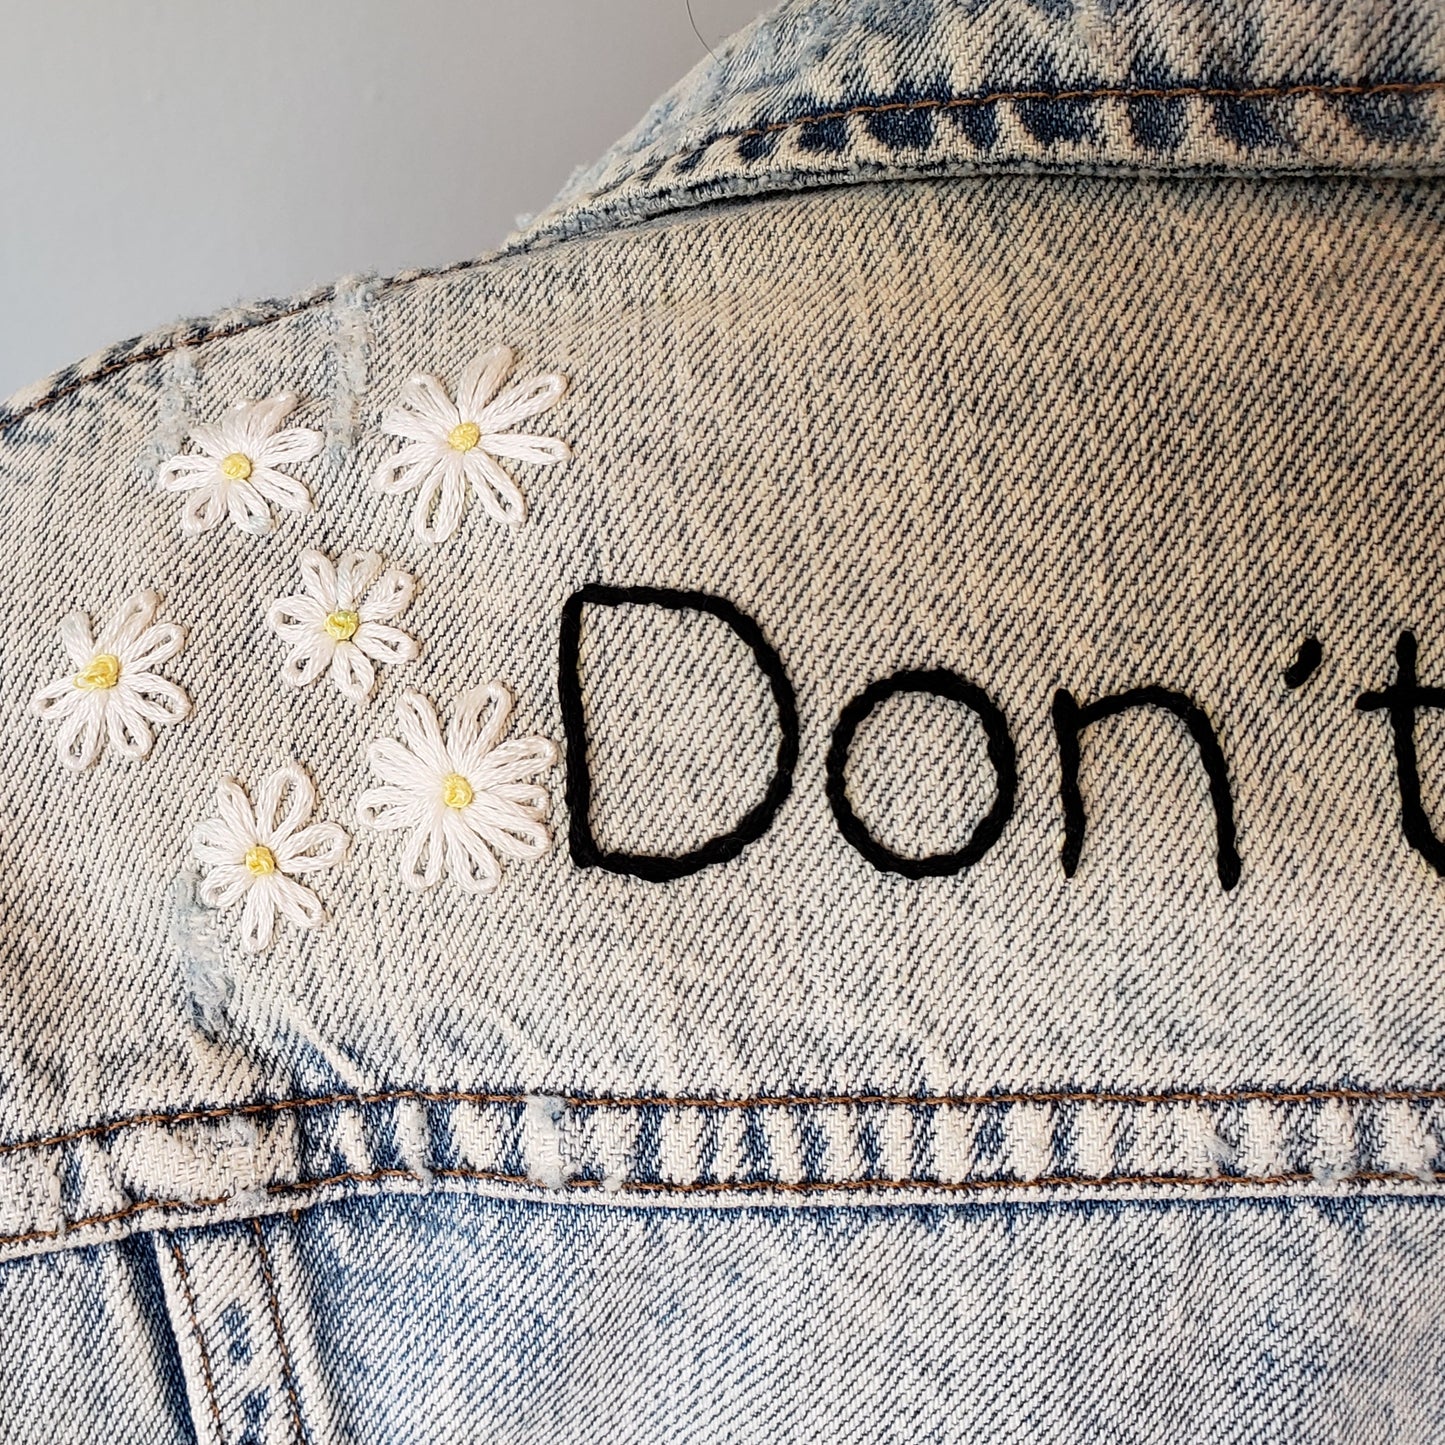 A detail shot of the daisies on the acid wash jacket. We can see the word "Don't" but this shot is about the 6 flowers that sit beside the text. Each flower has a light yellow french knot in the middle, and white petals. Most flowers have 8 petals.